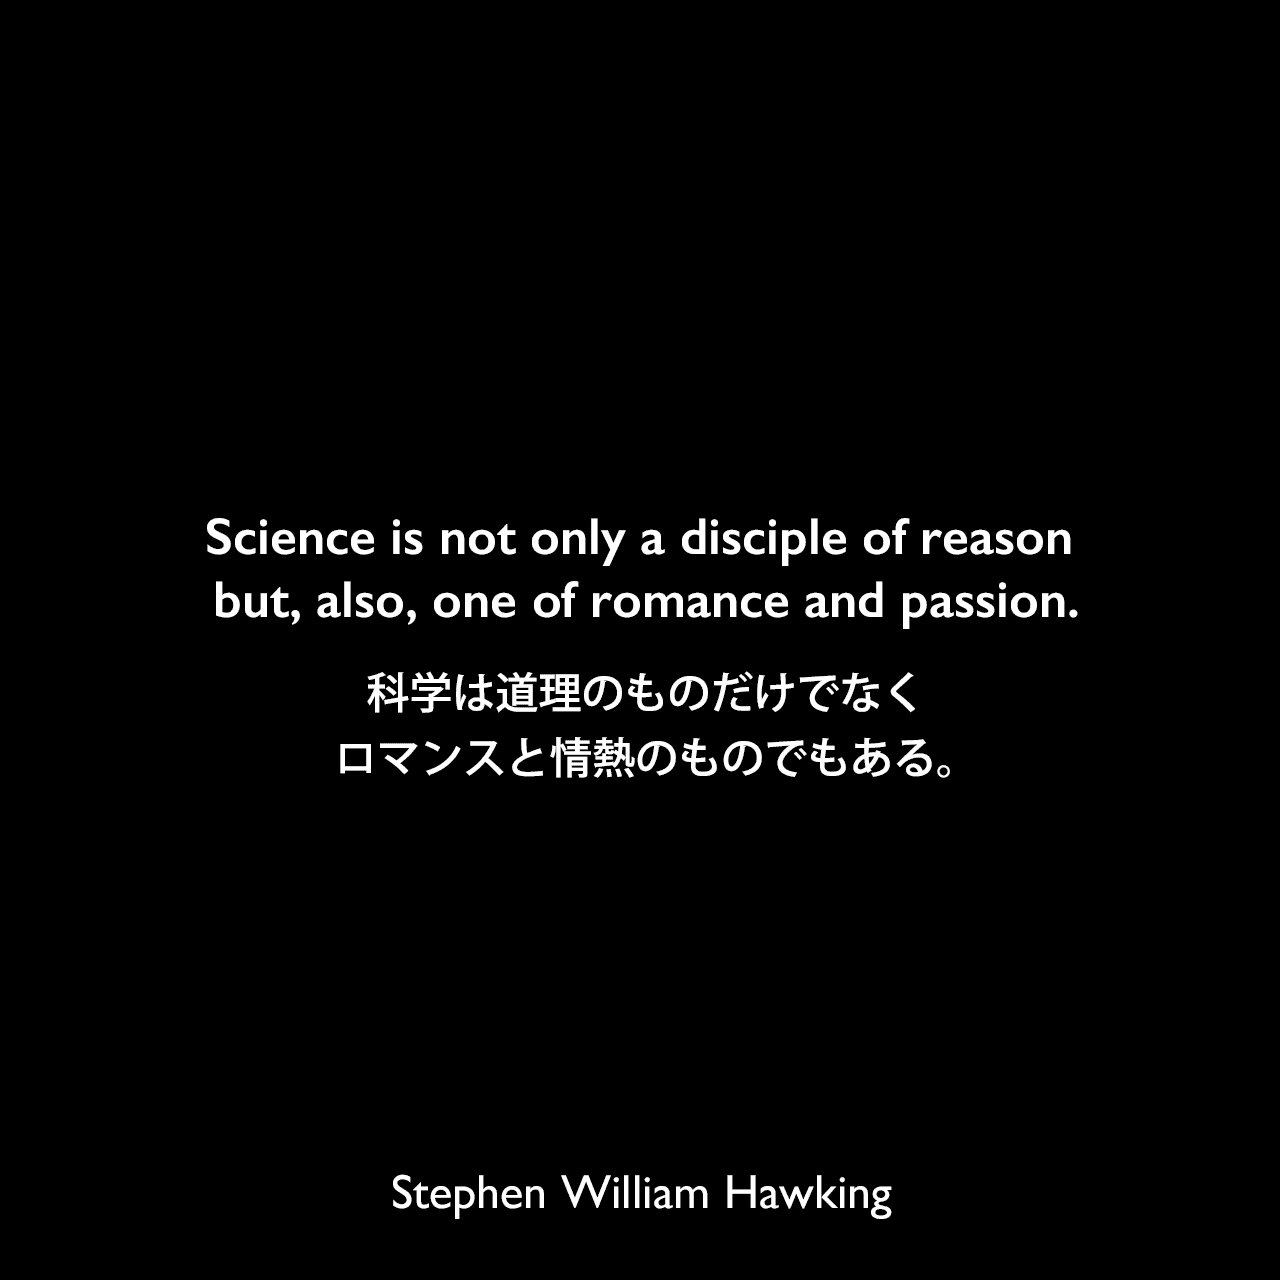 Science is not only a disciple of reason but, also, one of romance and passion.科学は道理のものだけでなくロマンスと情熱のものでもある。Stephen William Hawking